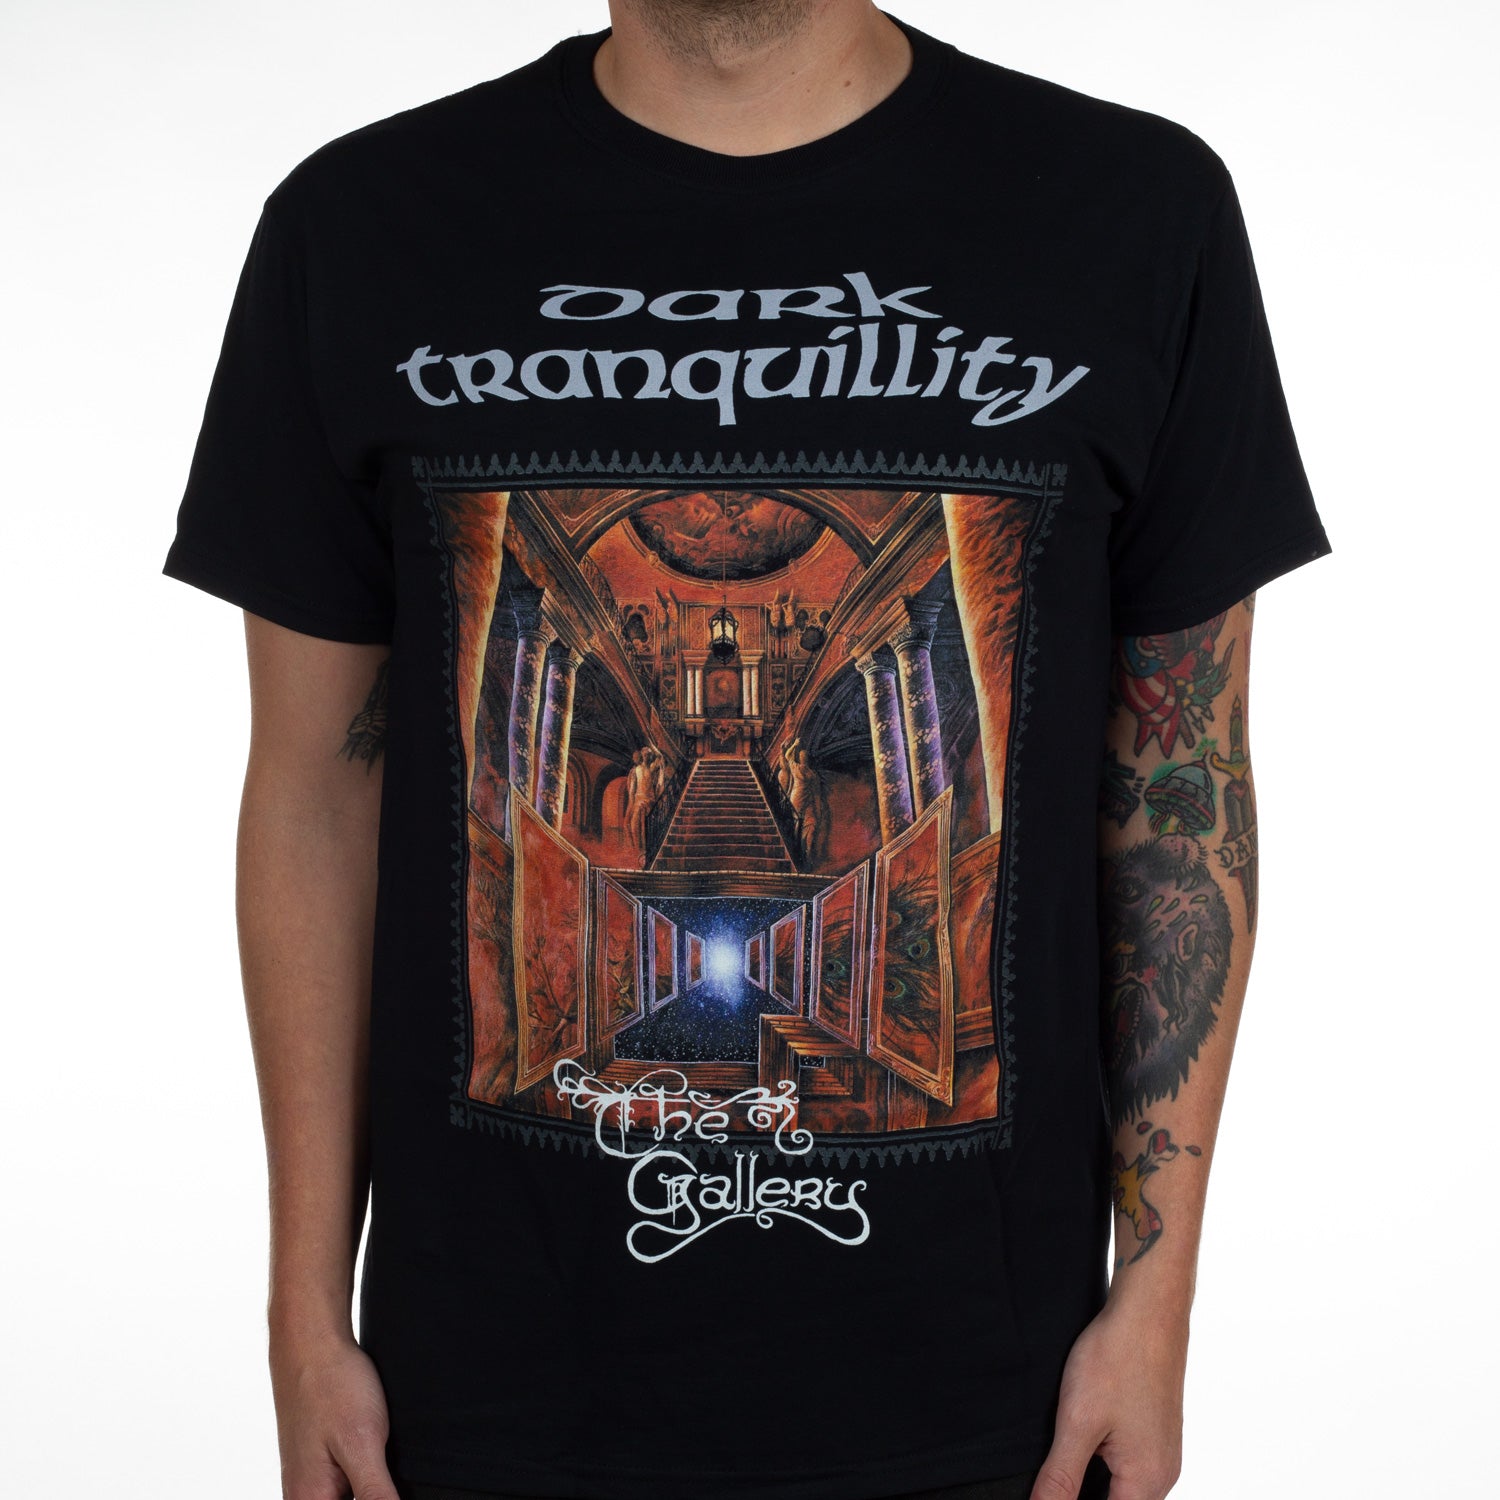 Tranquillity "The Gallery" T-Shirt